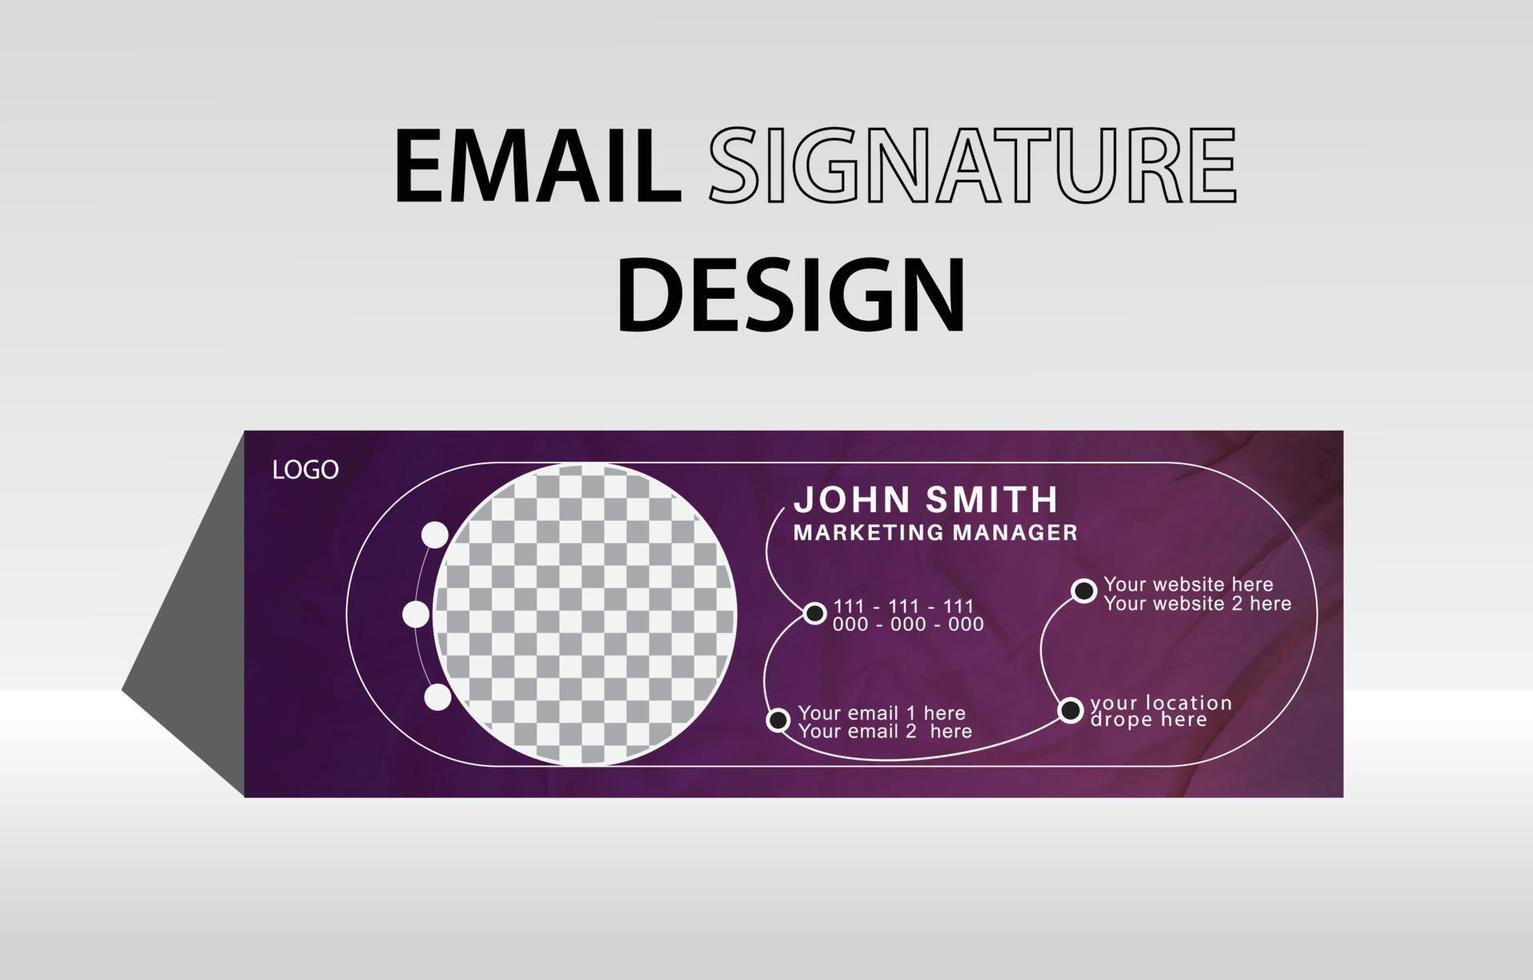 Modern business email signature and personal email footer template design vector